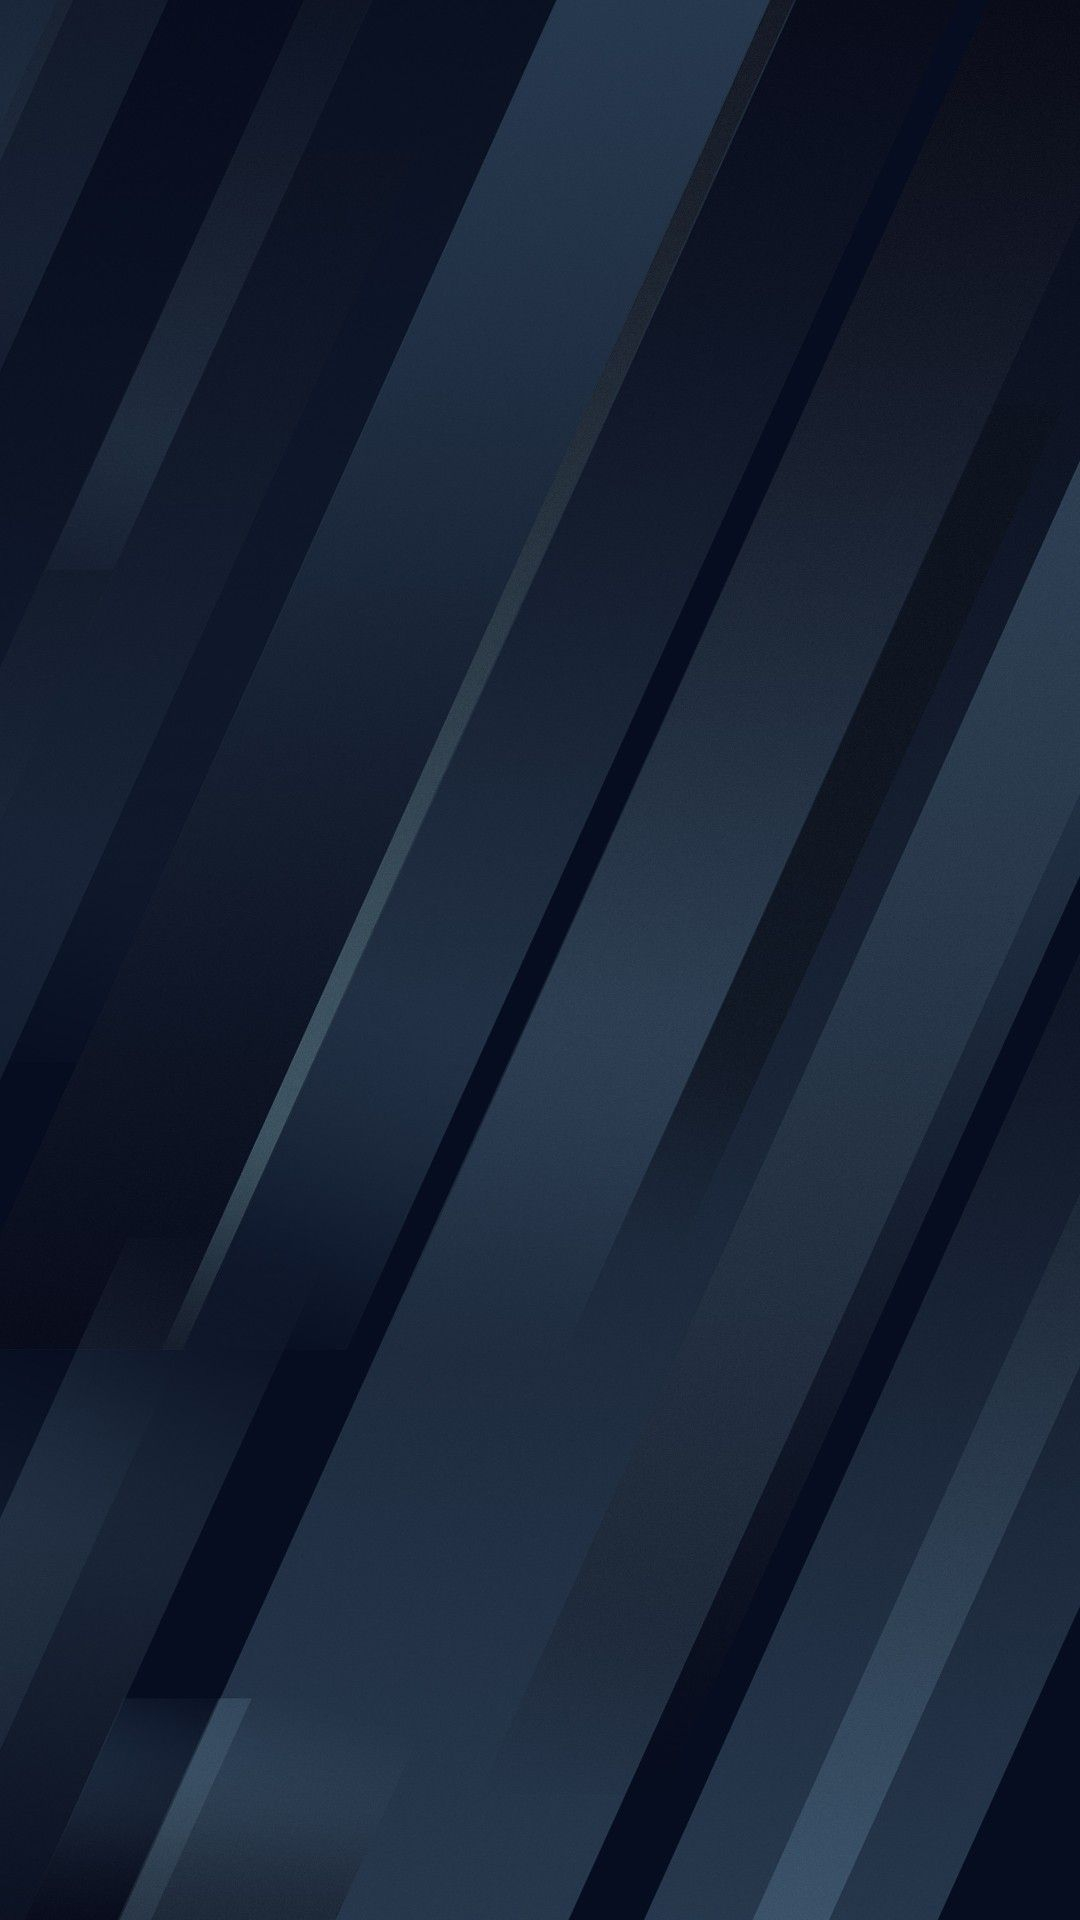 1080x1920 Solid Navy Blue iPhone Wallpapers